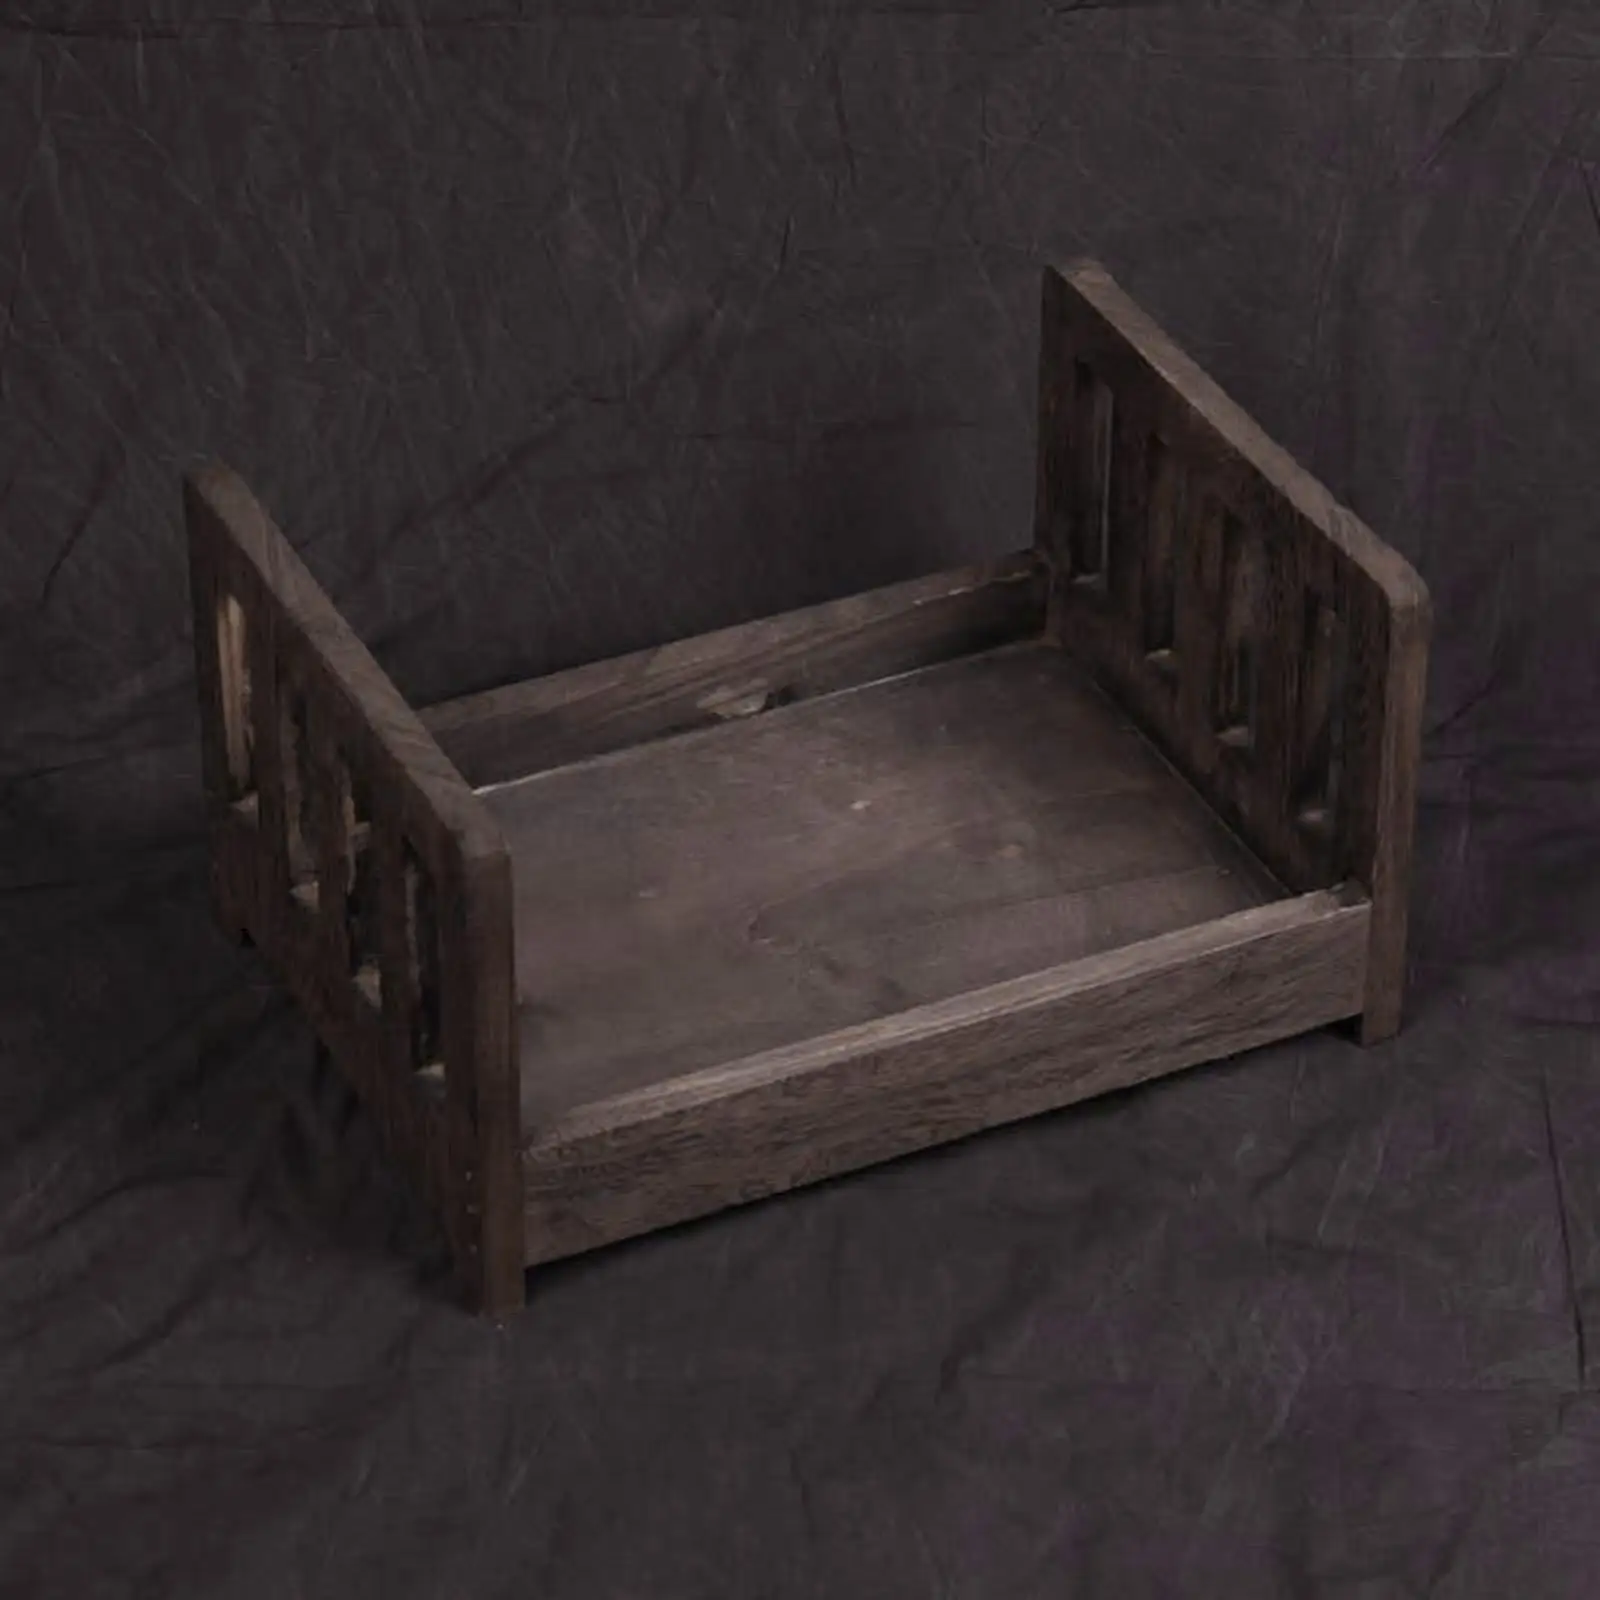 Creative Posing Photography Wooden Bed Photography Props Props for Infant